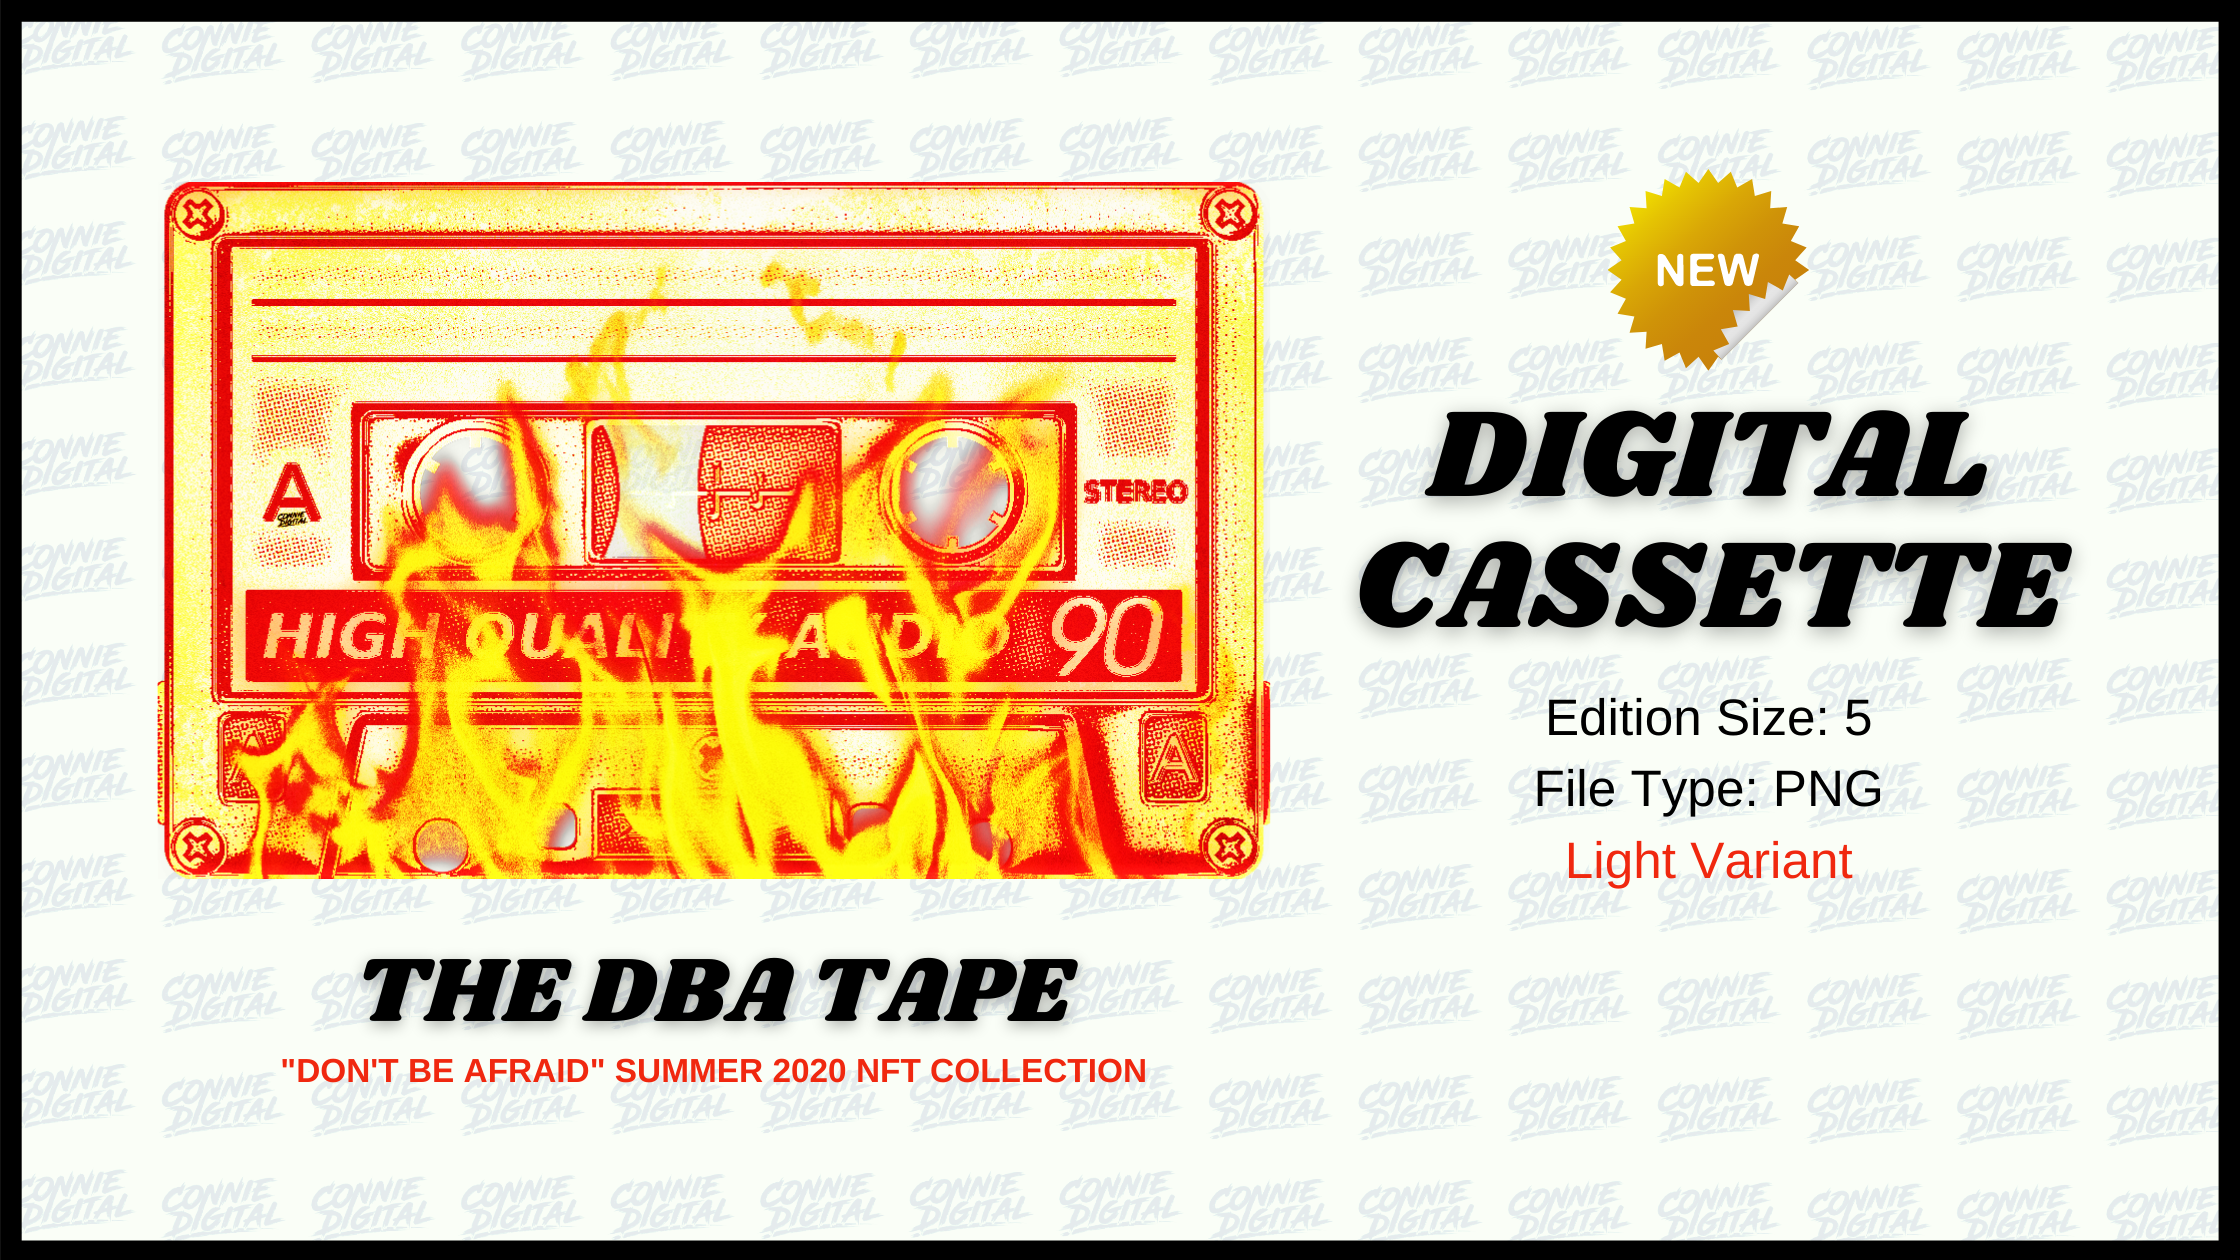 DIGITAL Collectibles The DBA Tape Connie Digital